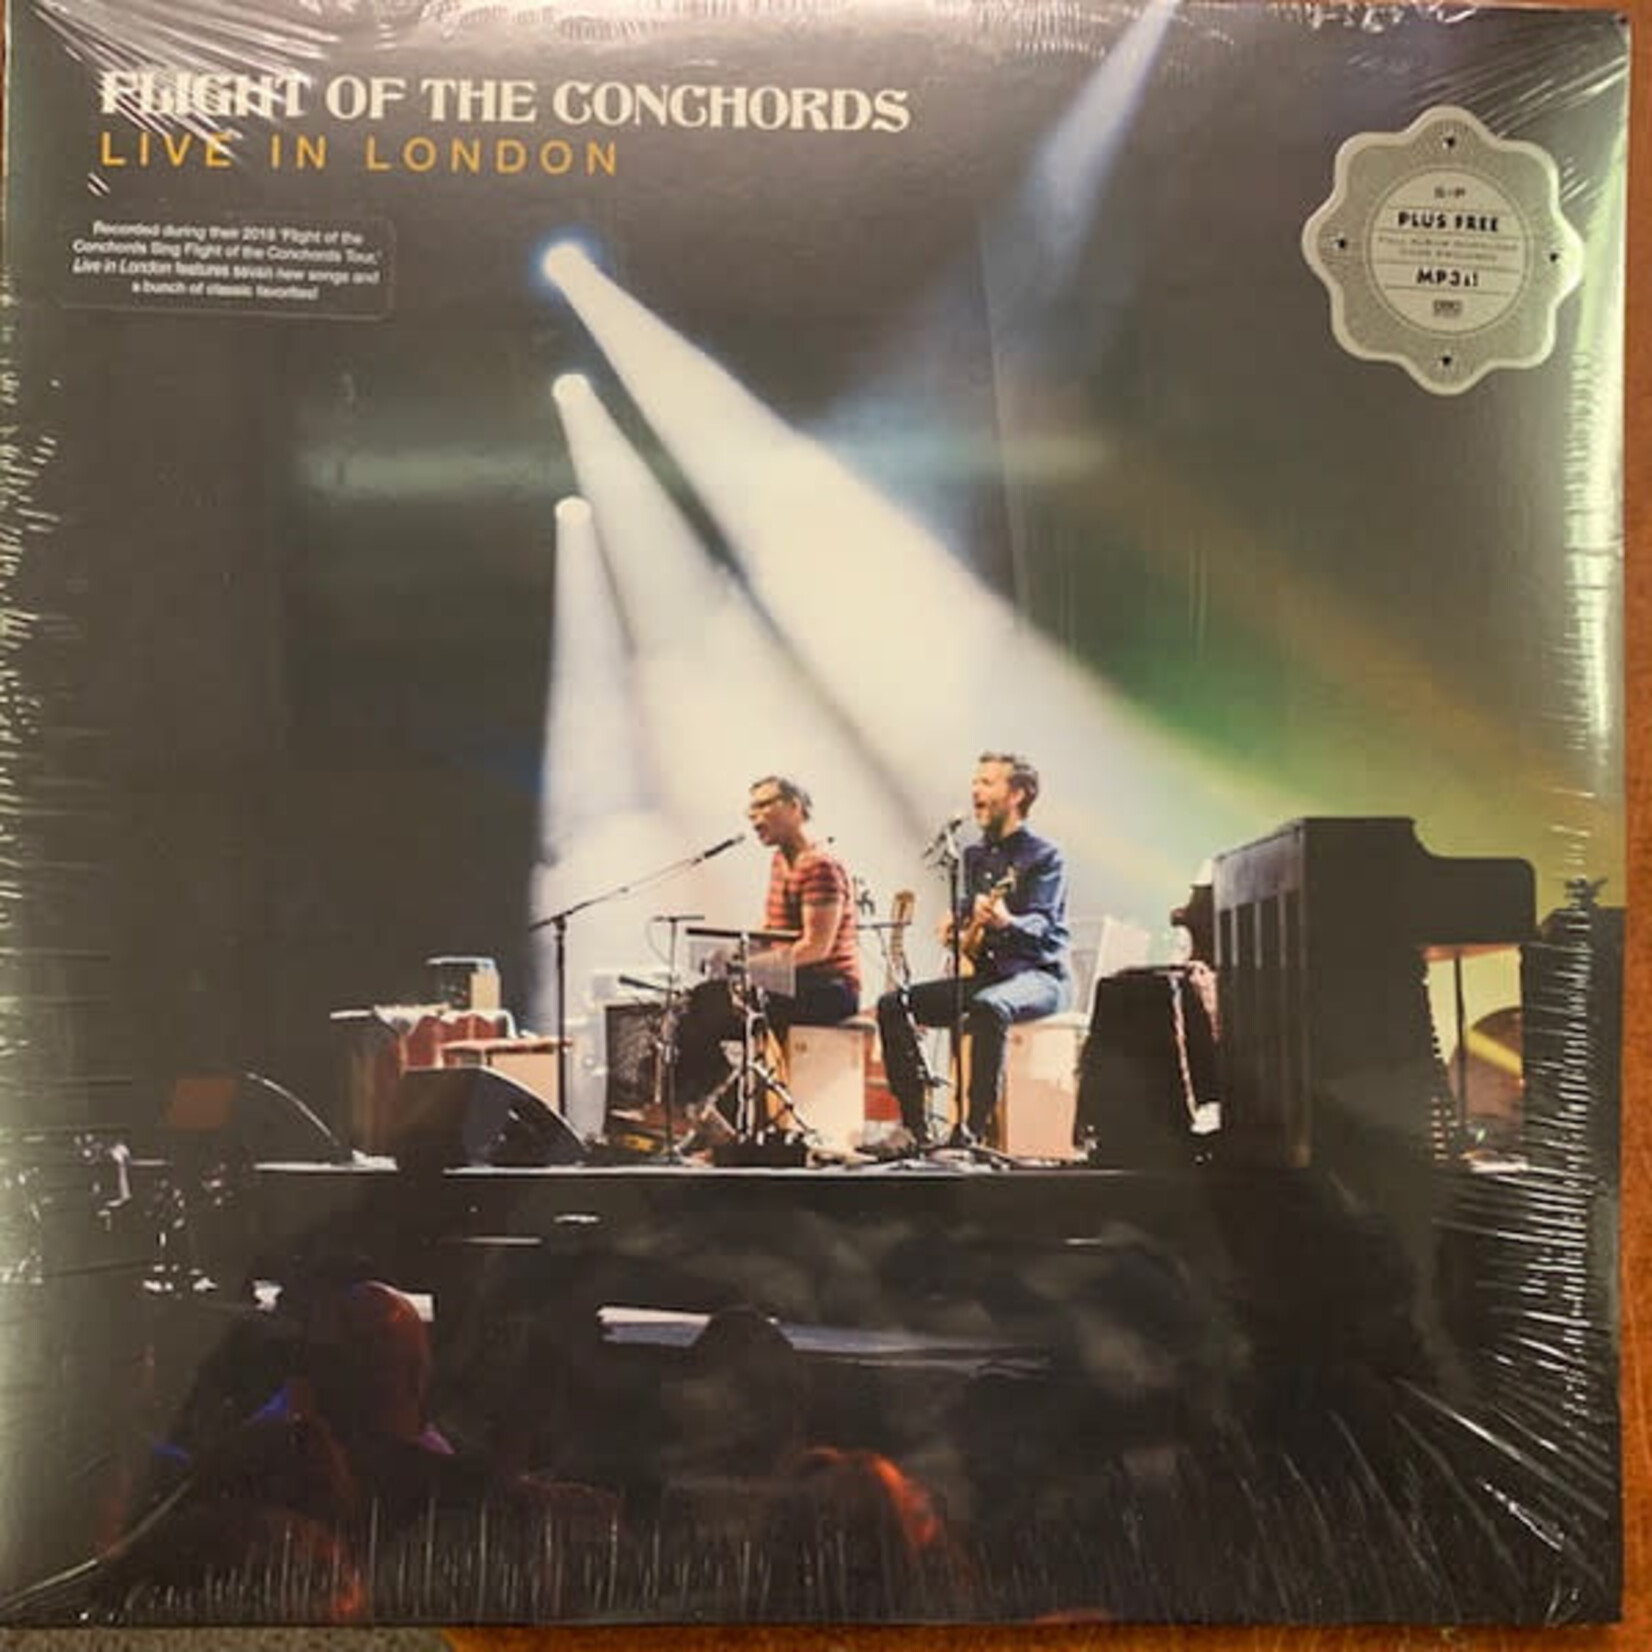 Sub Pop Flight of the Conchords - Live In London (3LP)